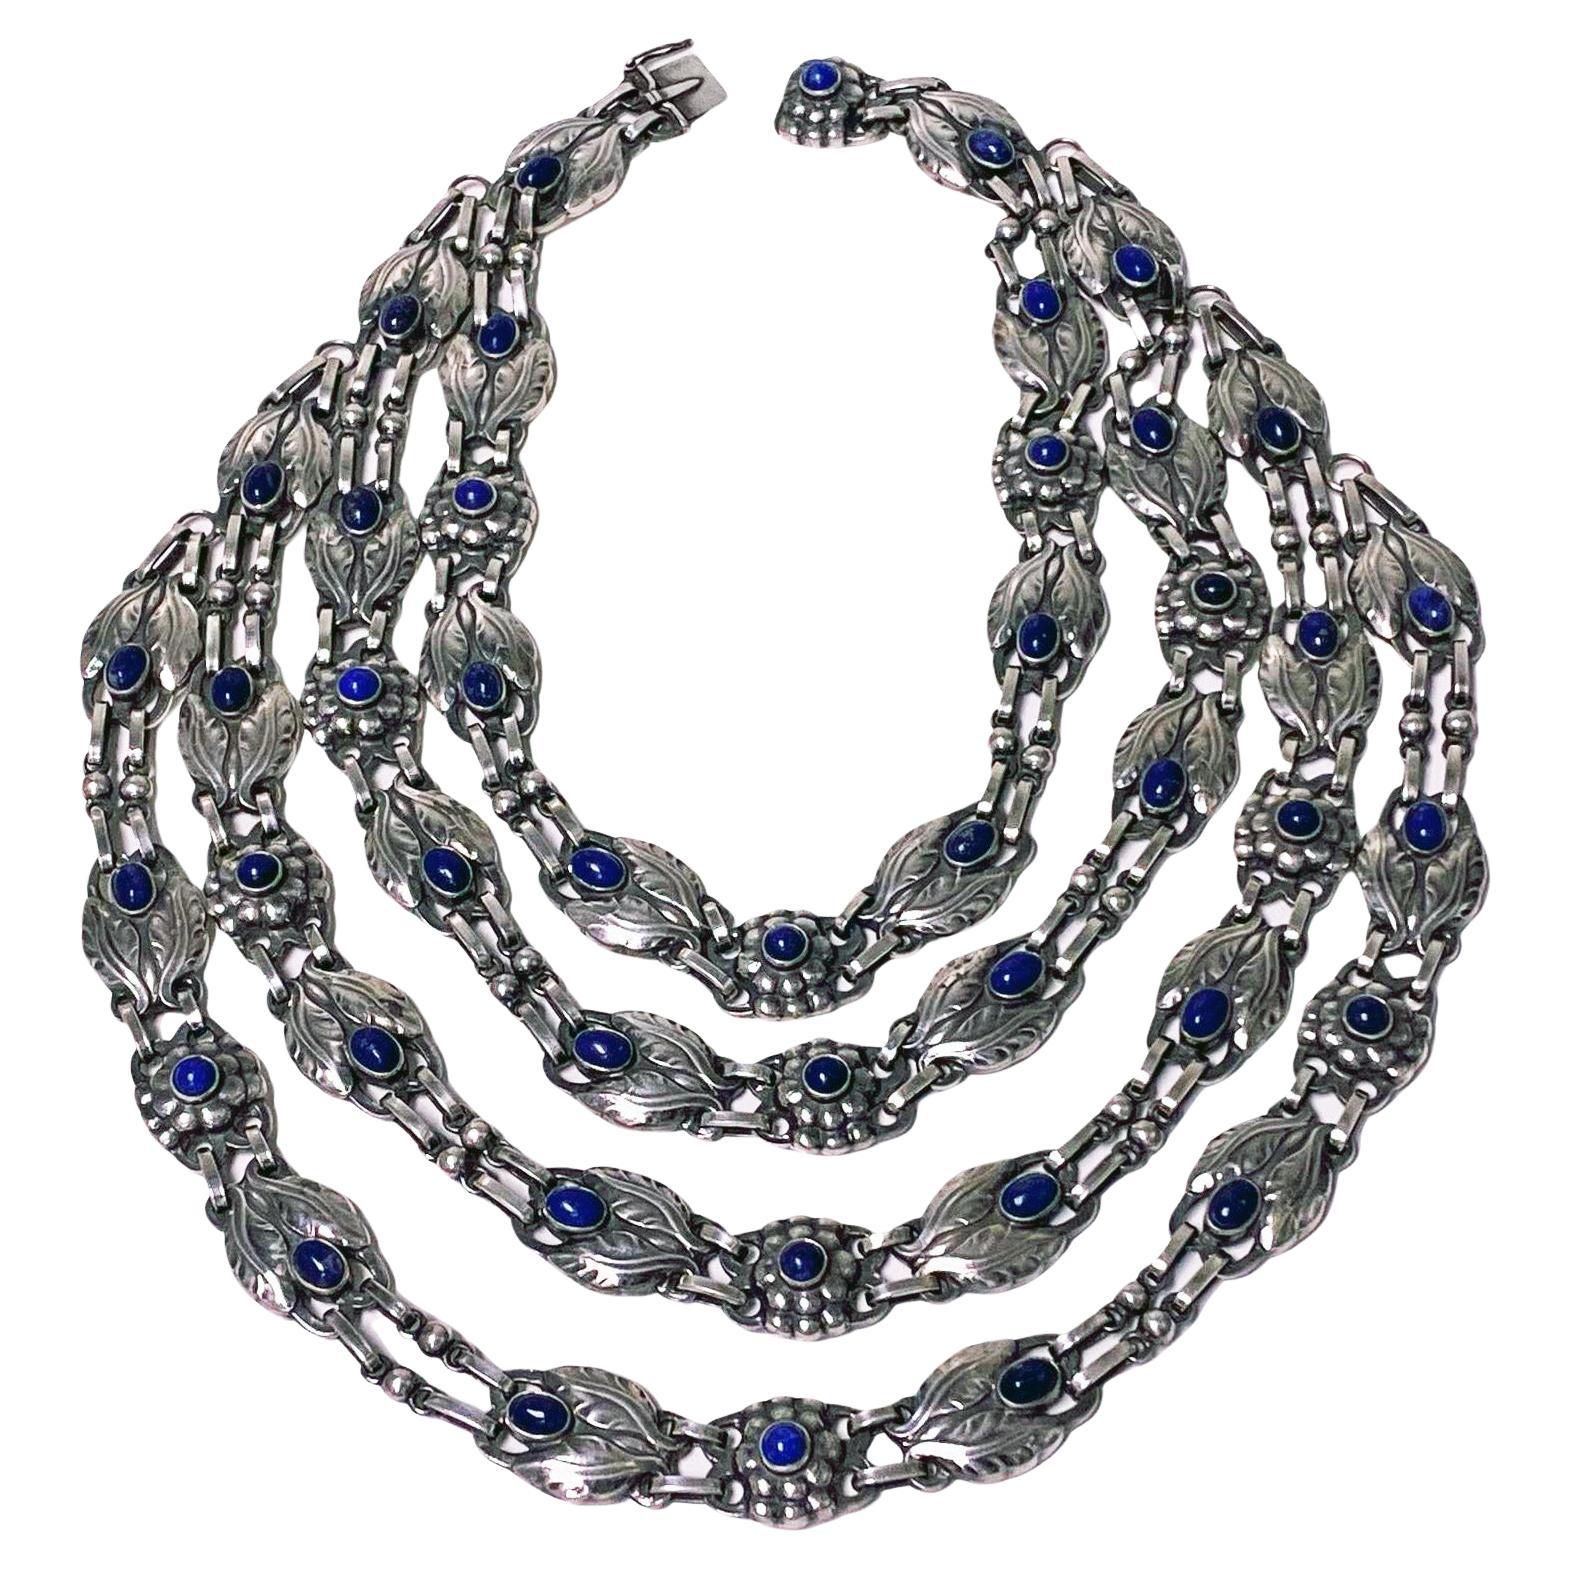 Georg Jensen 4 strand Lapis and Sterling Silver Necklace C.1933 For Sale